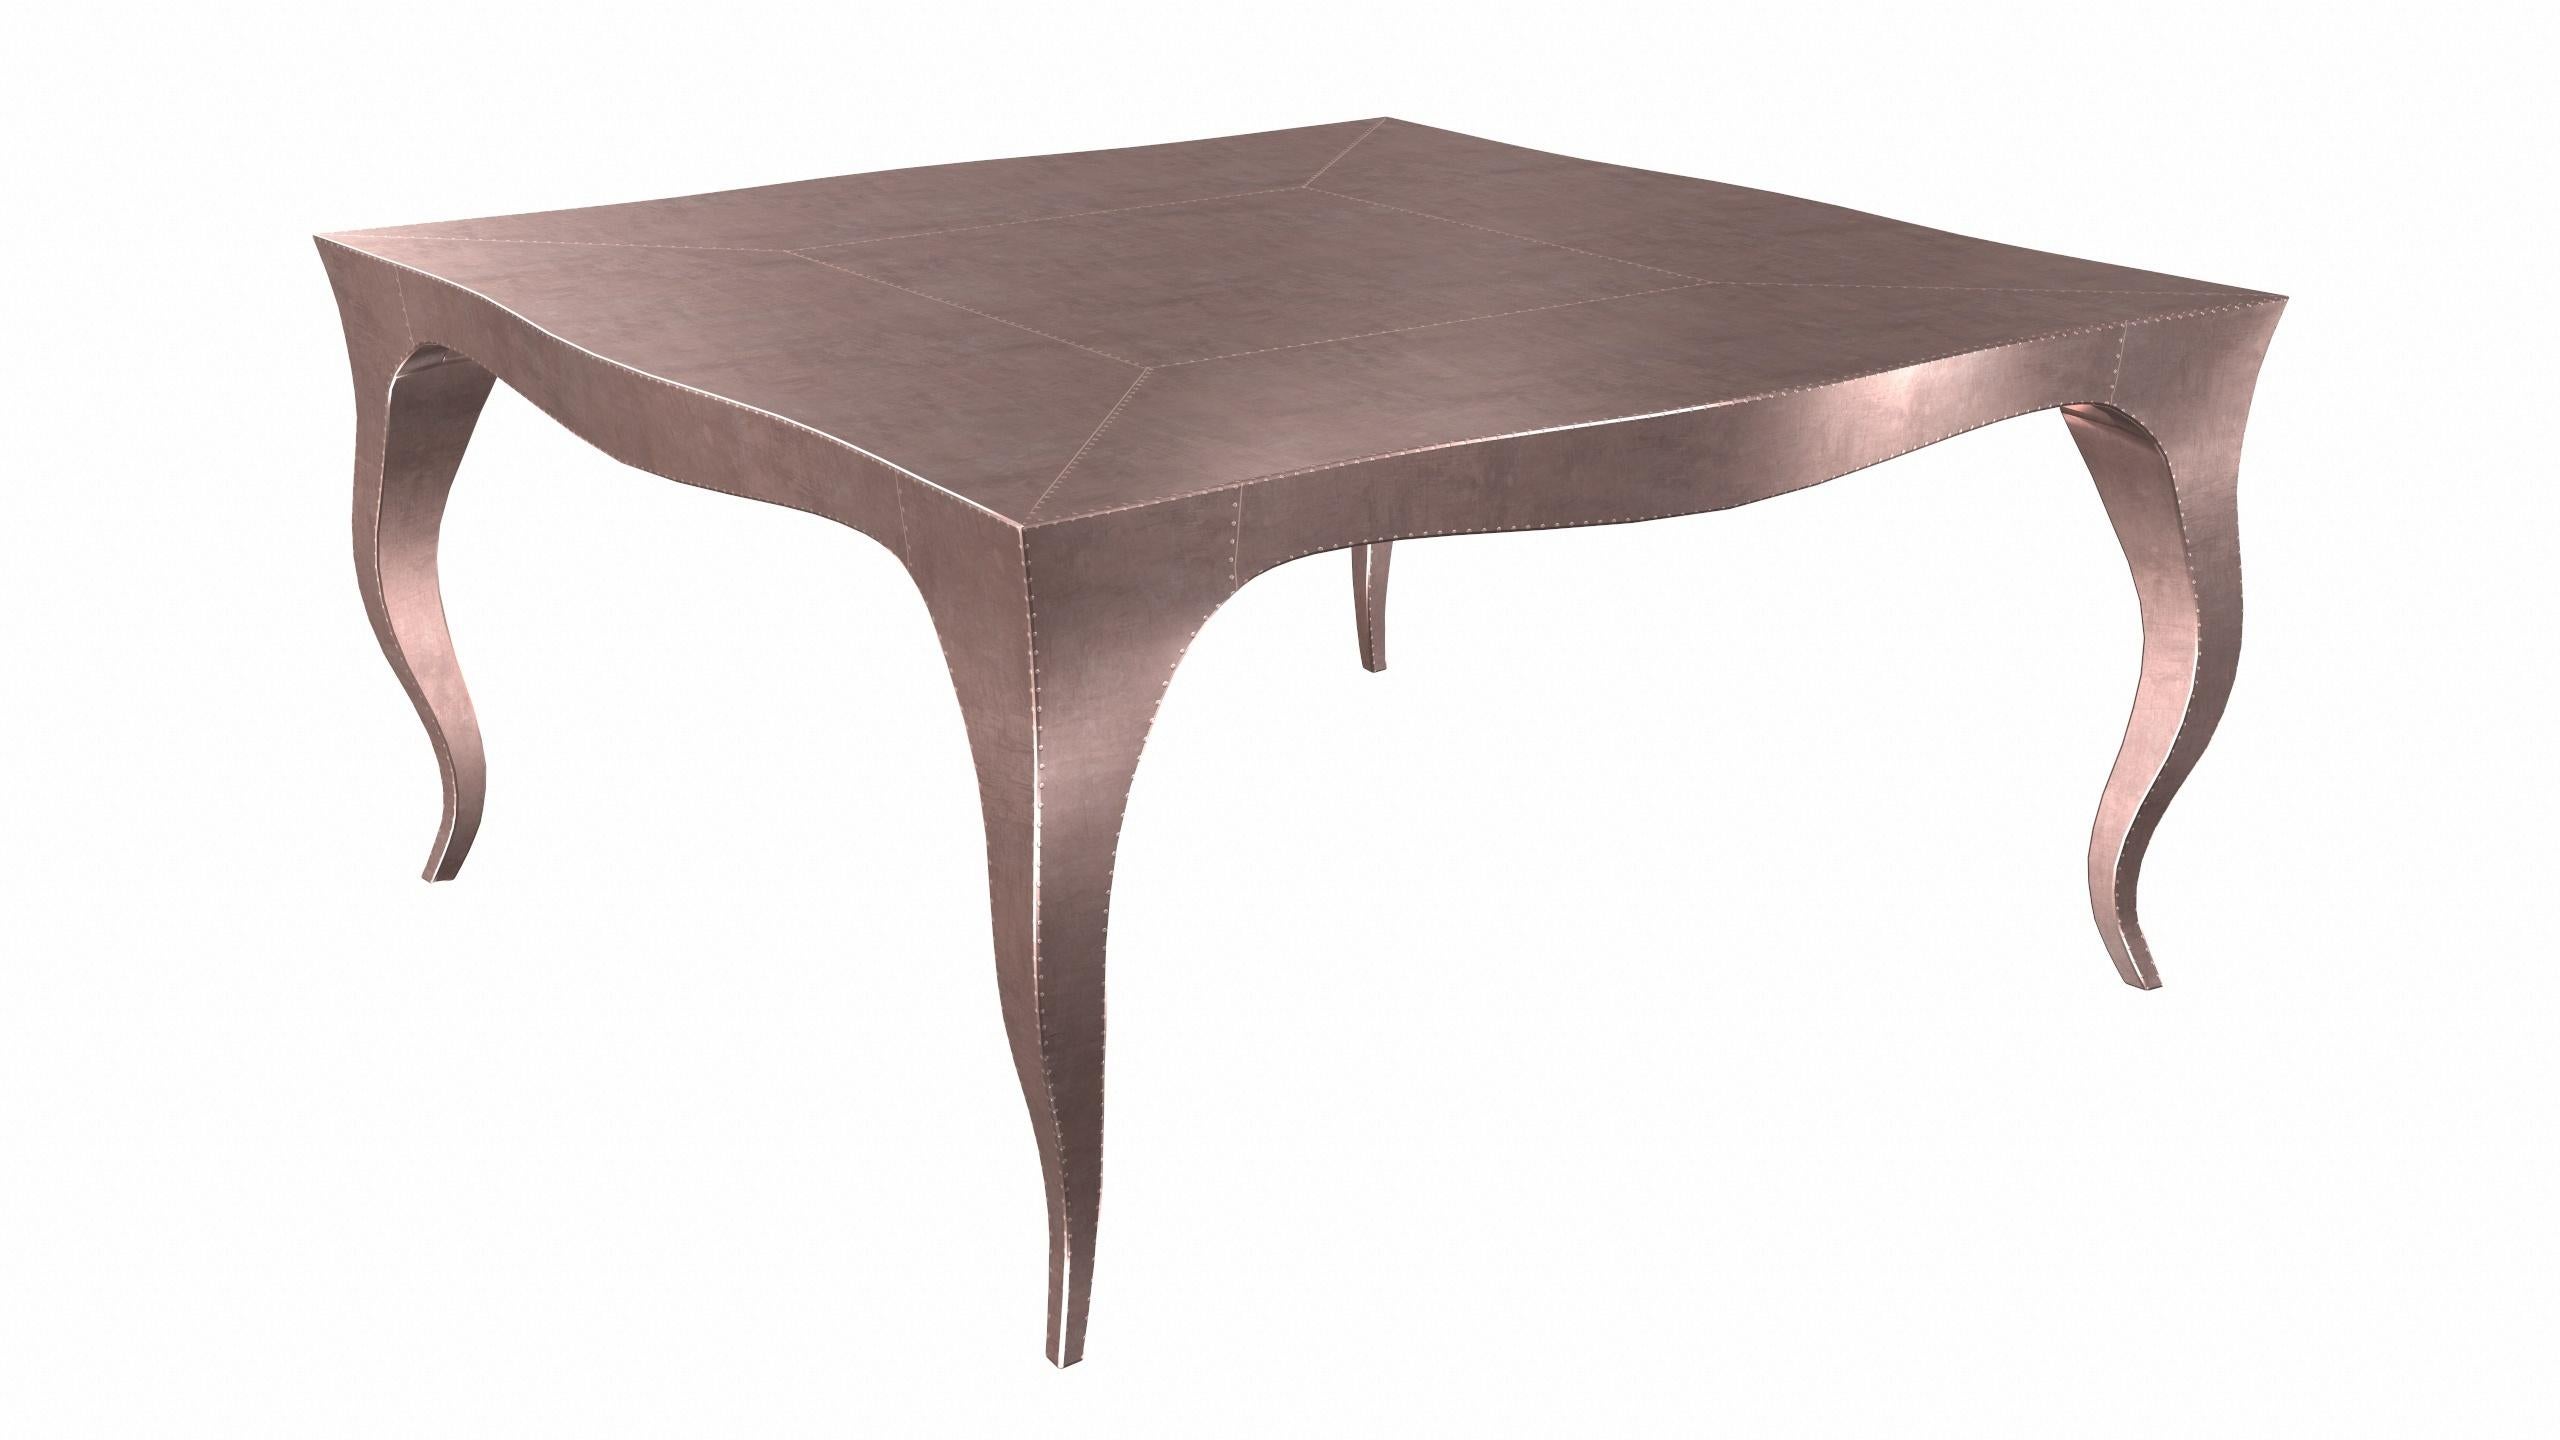 Metal Louise Art Deco Game Tables Smooth Copper 18.5x18.5x10 inch by Paul Mathieu For Sale